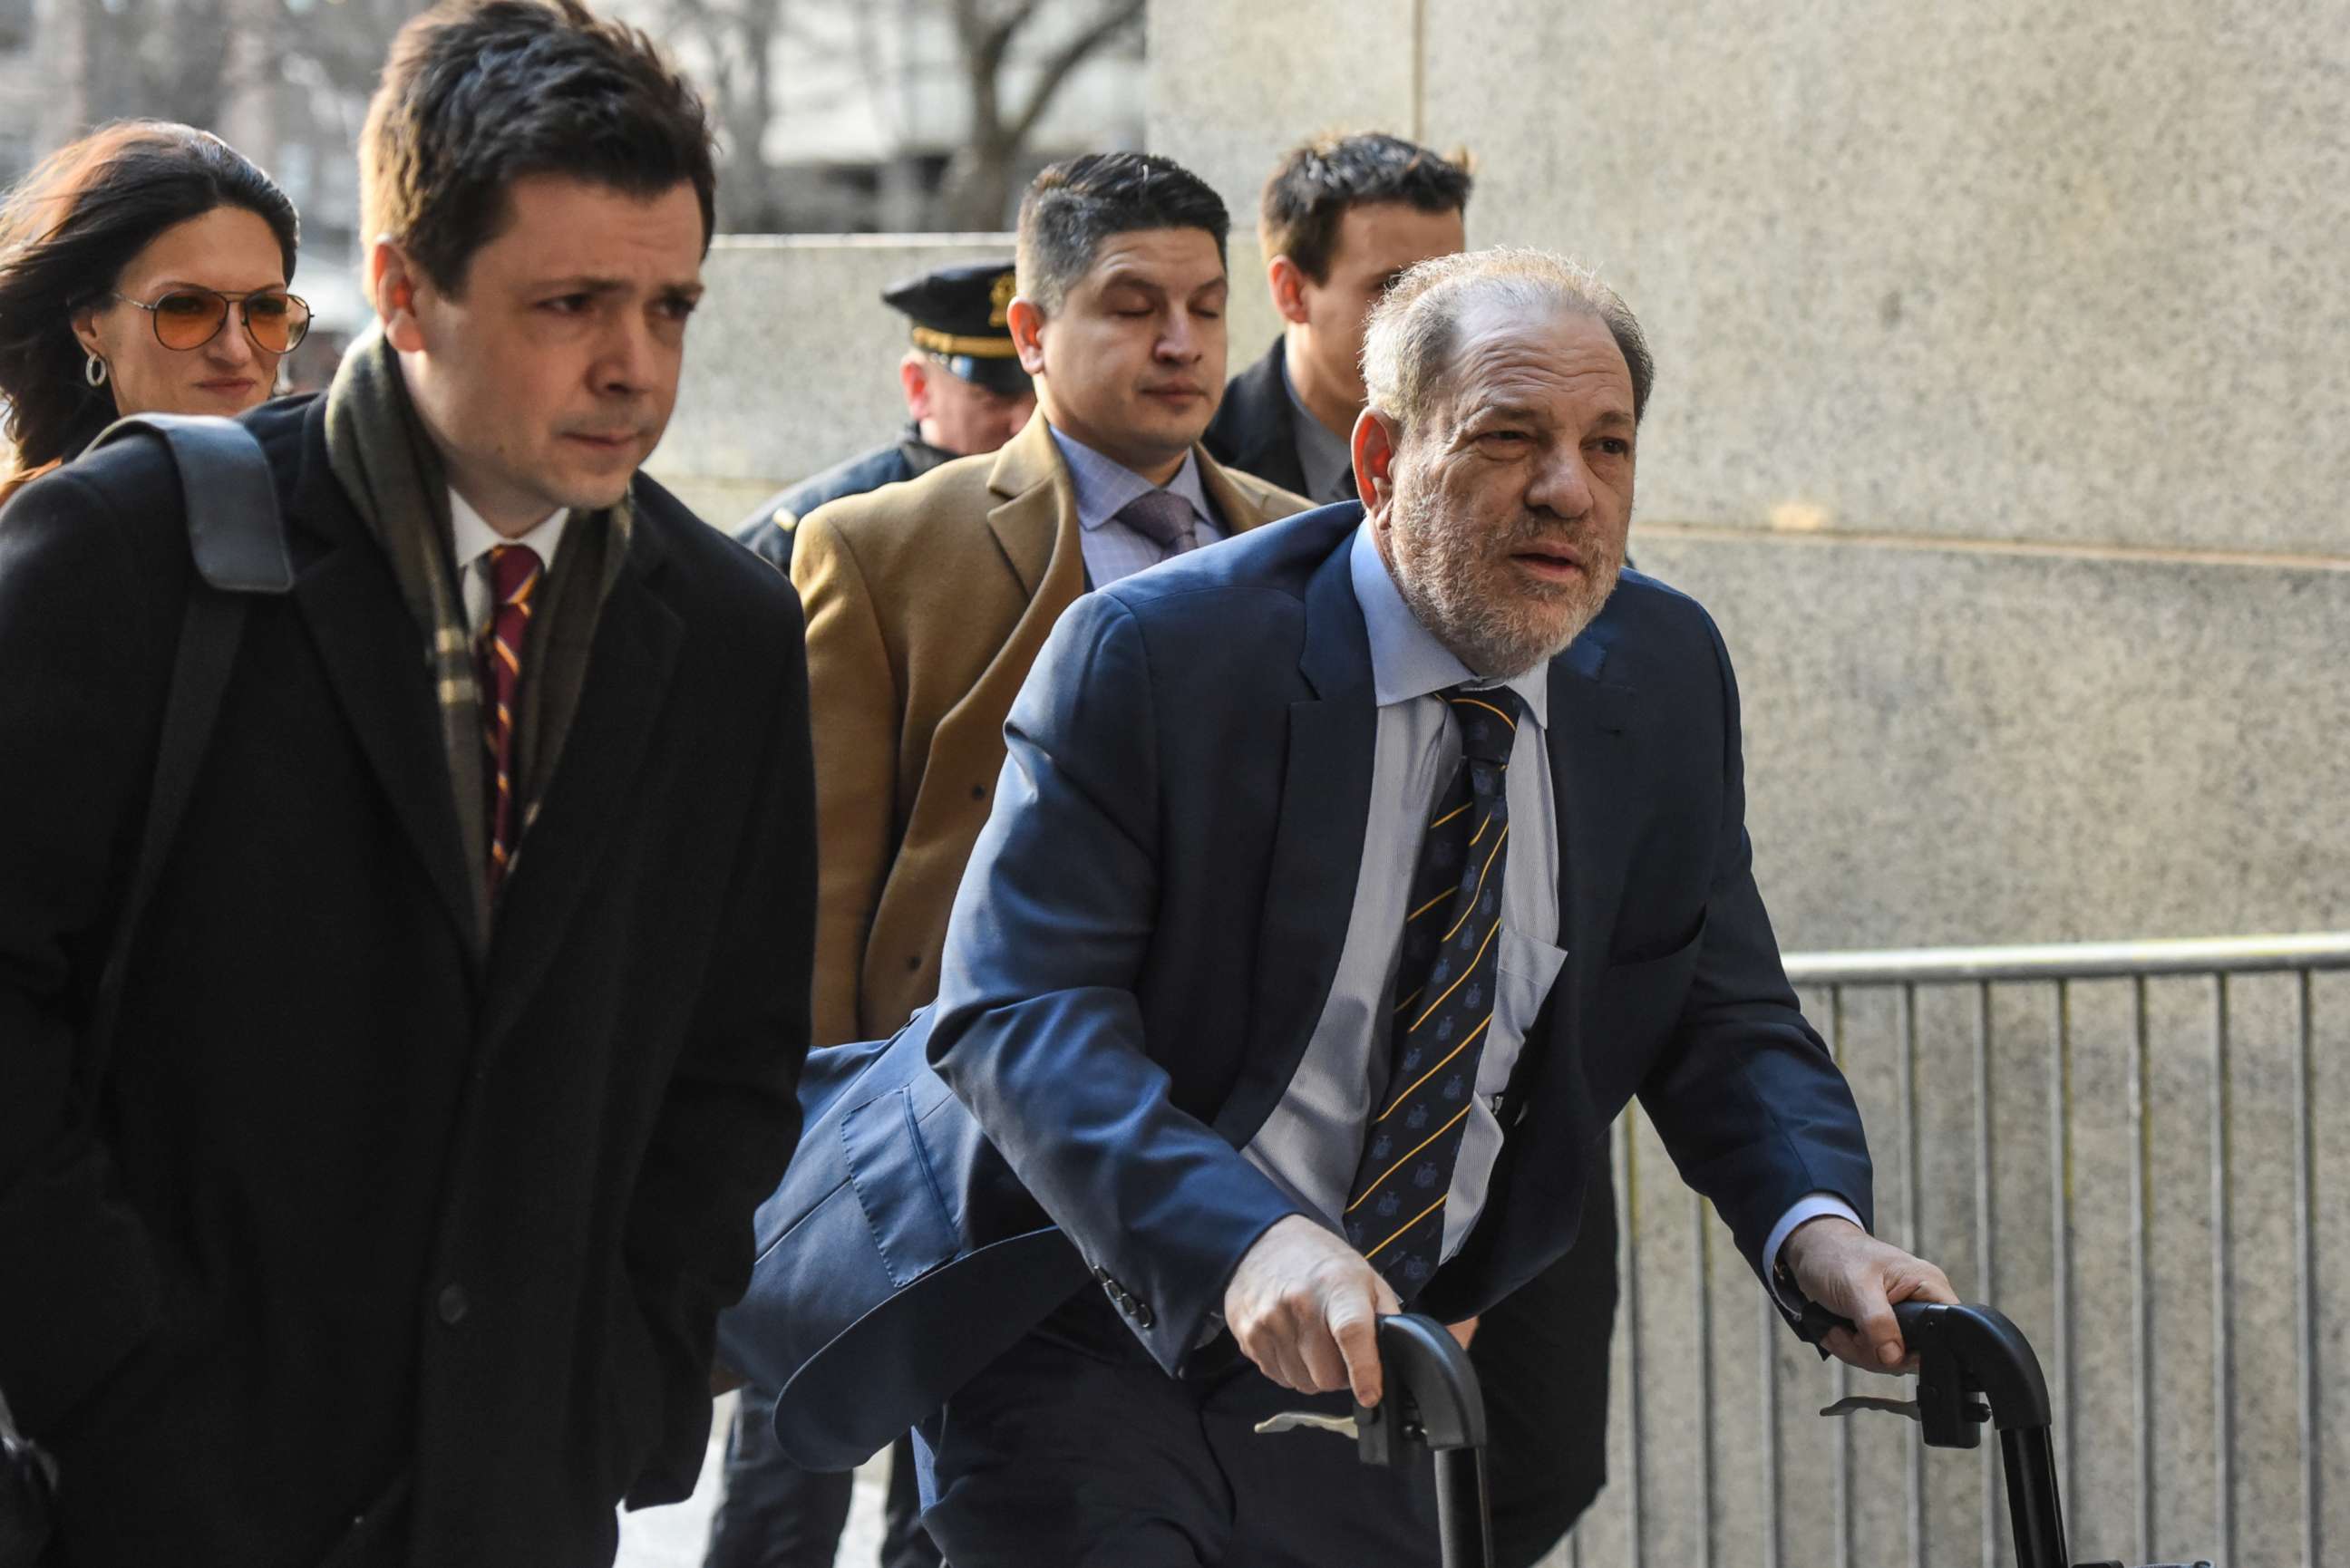 PHOTO: Harvey Weinstein arrives for his sexual assault trial at New York Criminal Court on Feb. 14, 2020 in New York City.